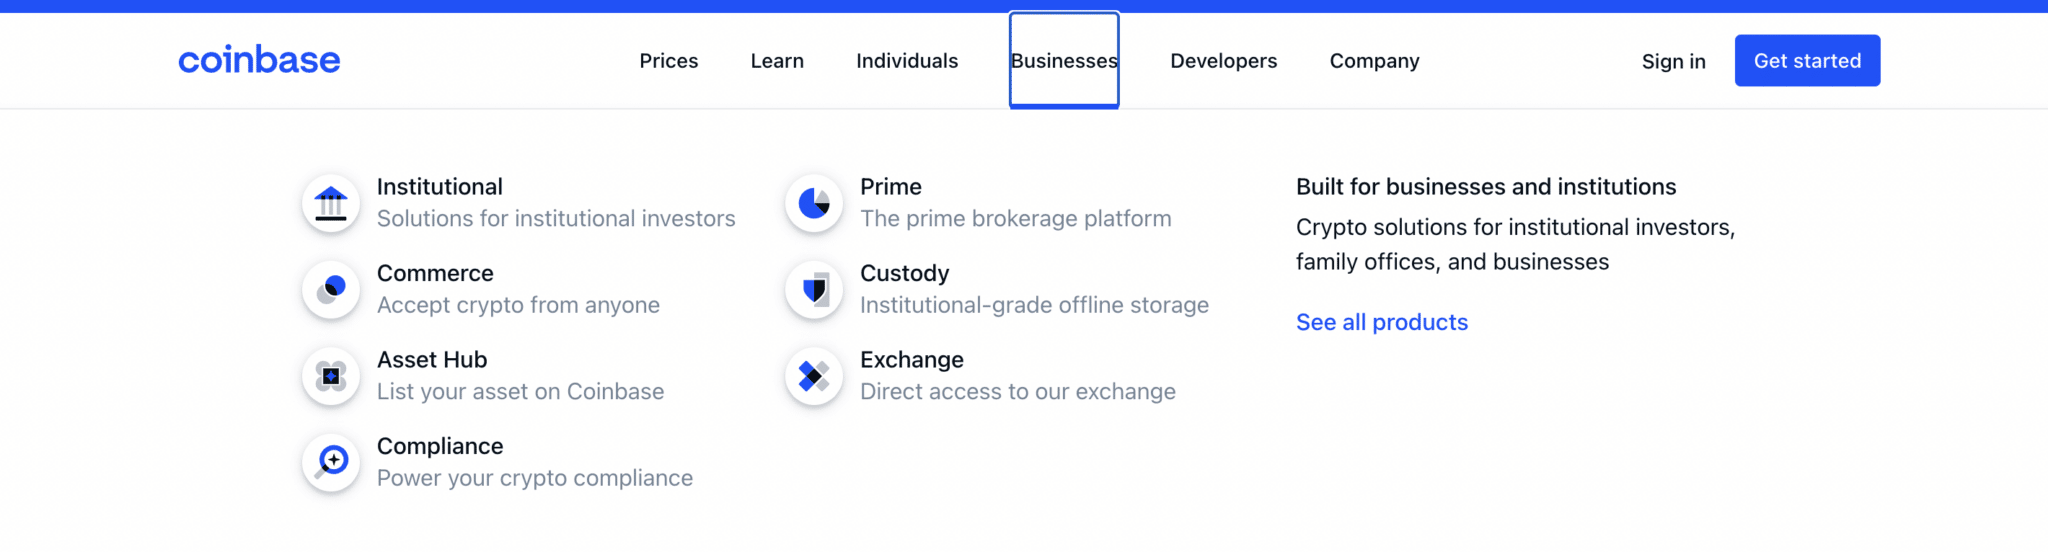 Coinbase For Small Business